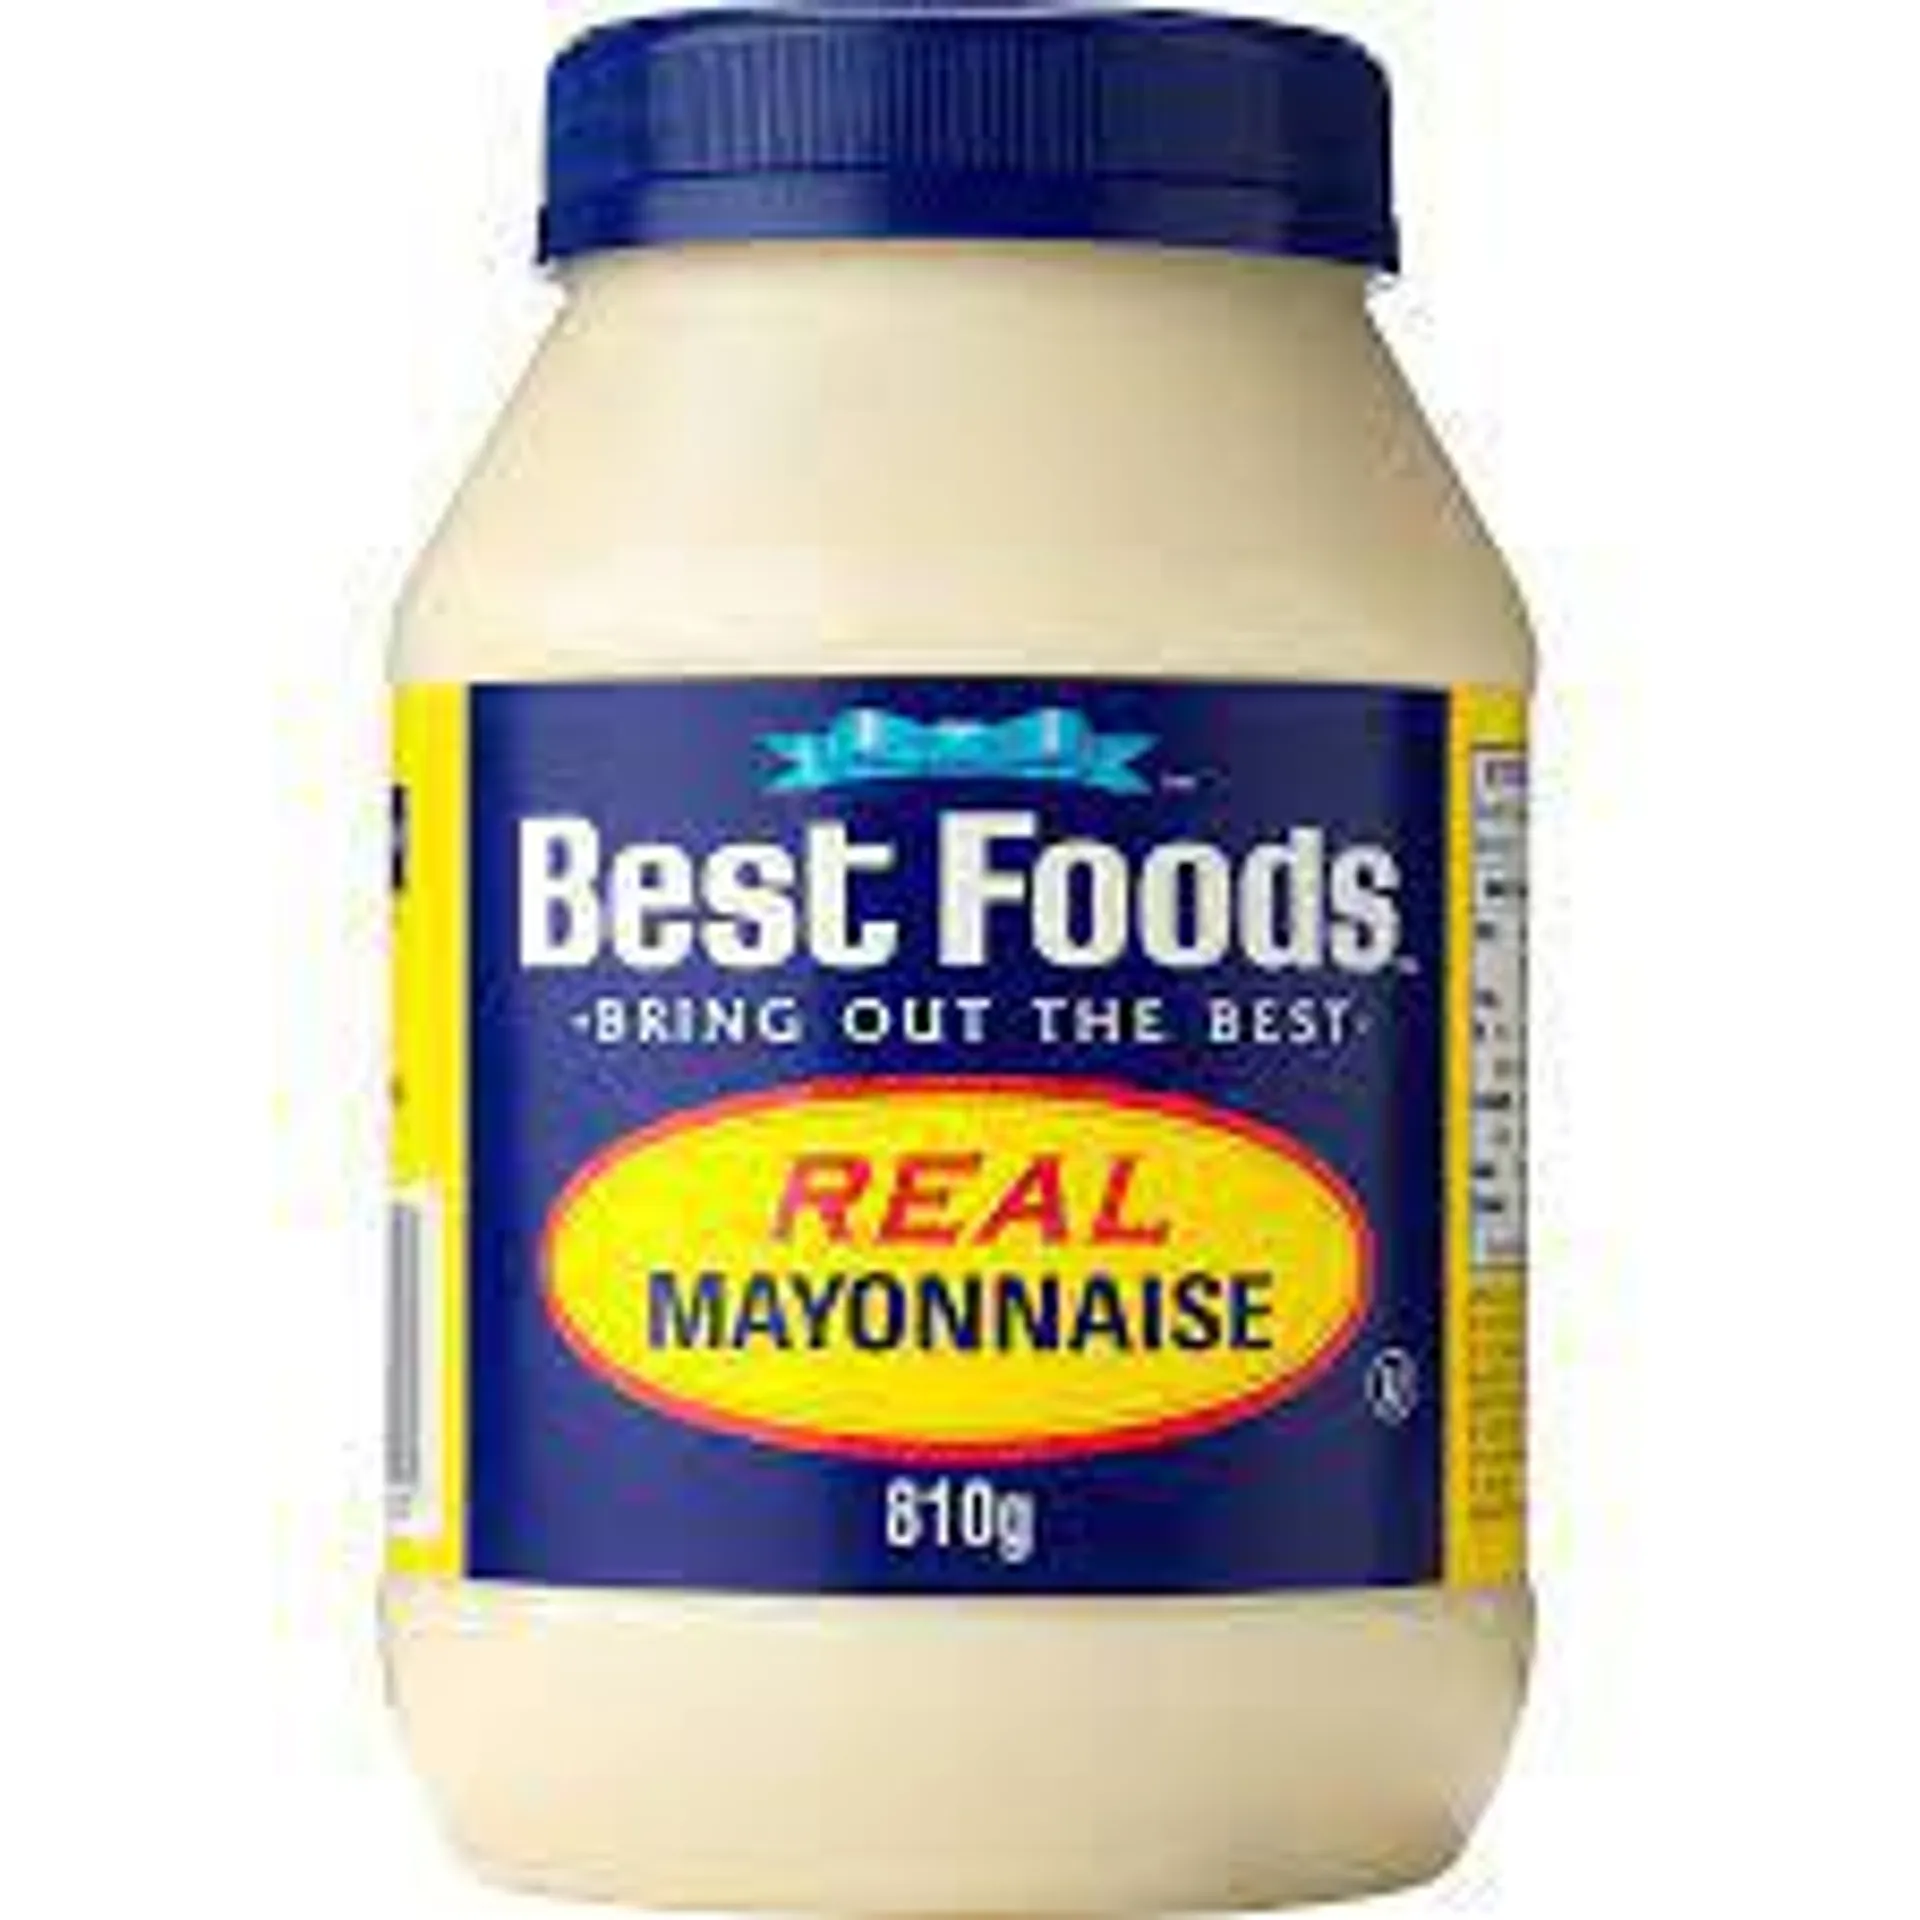 Best Food Real Mayonnaise 810g